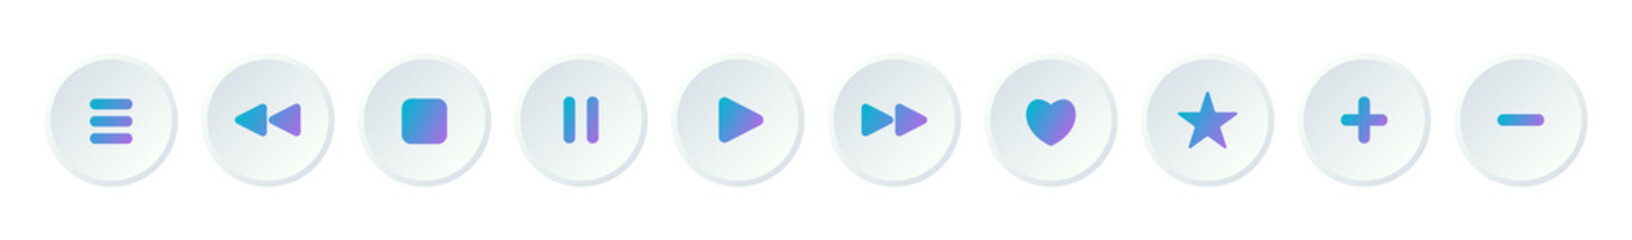 Music player vector buttons. Music player gradient symbols. UI icons set. User interface elements for mobile app